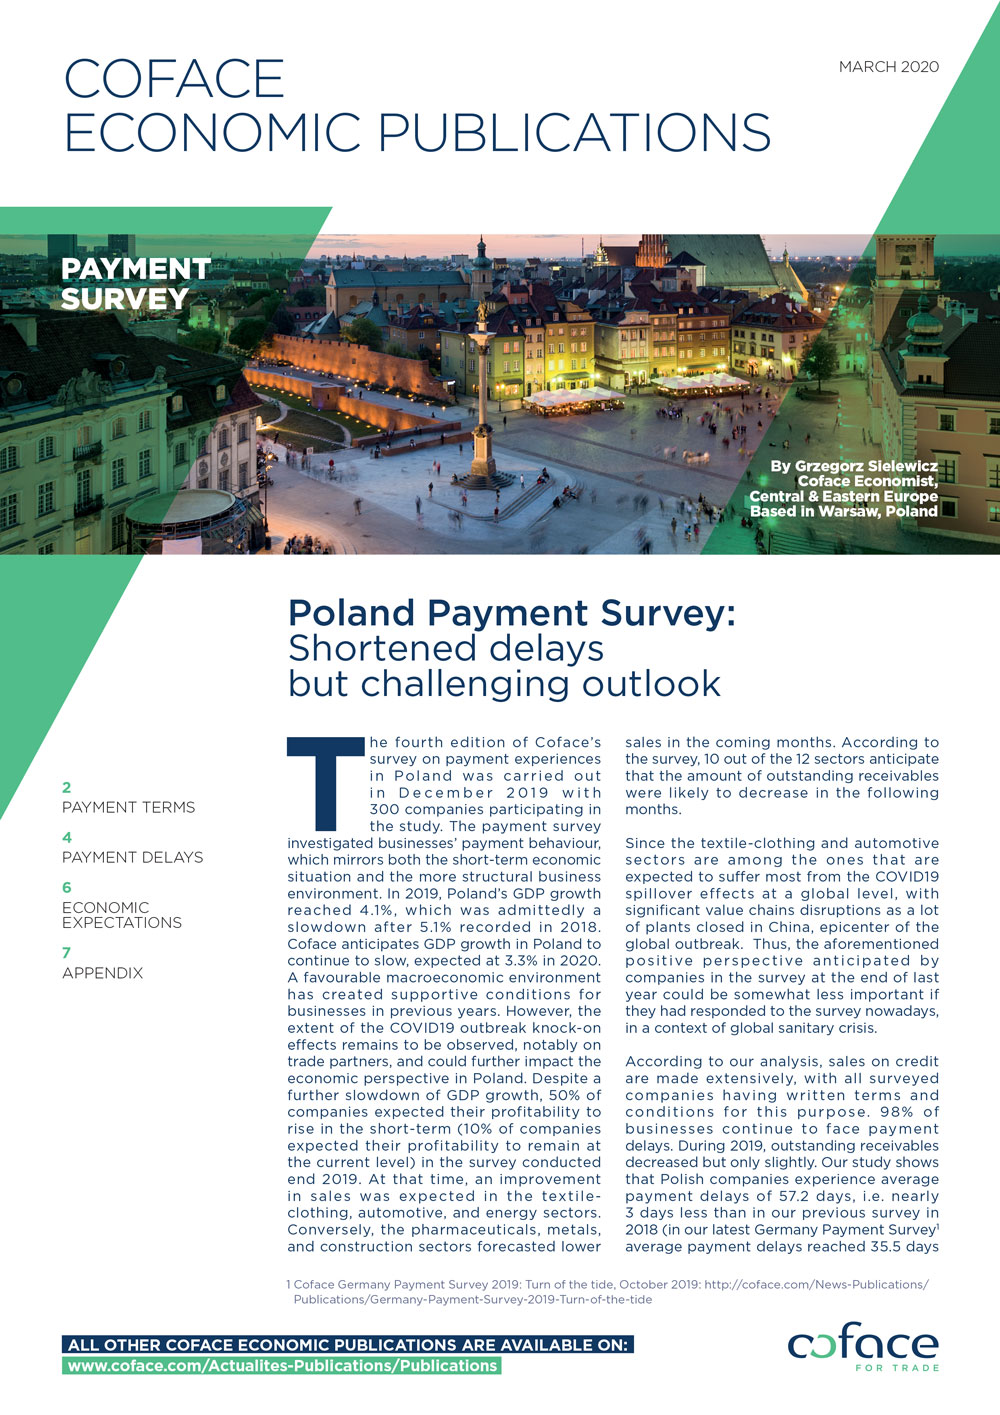 Poland Payment Survey: Shortened delays but challenging outlook